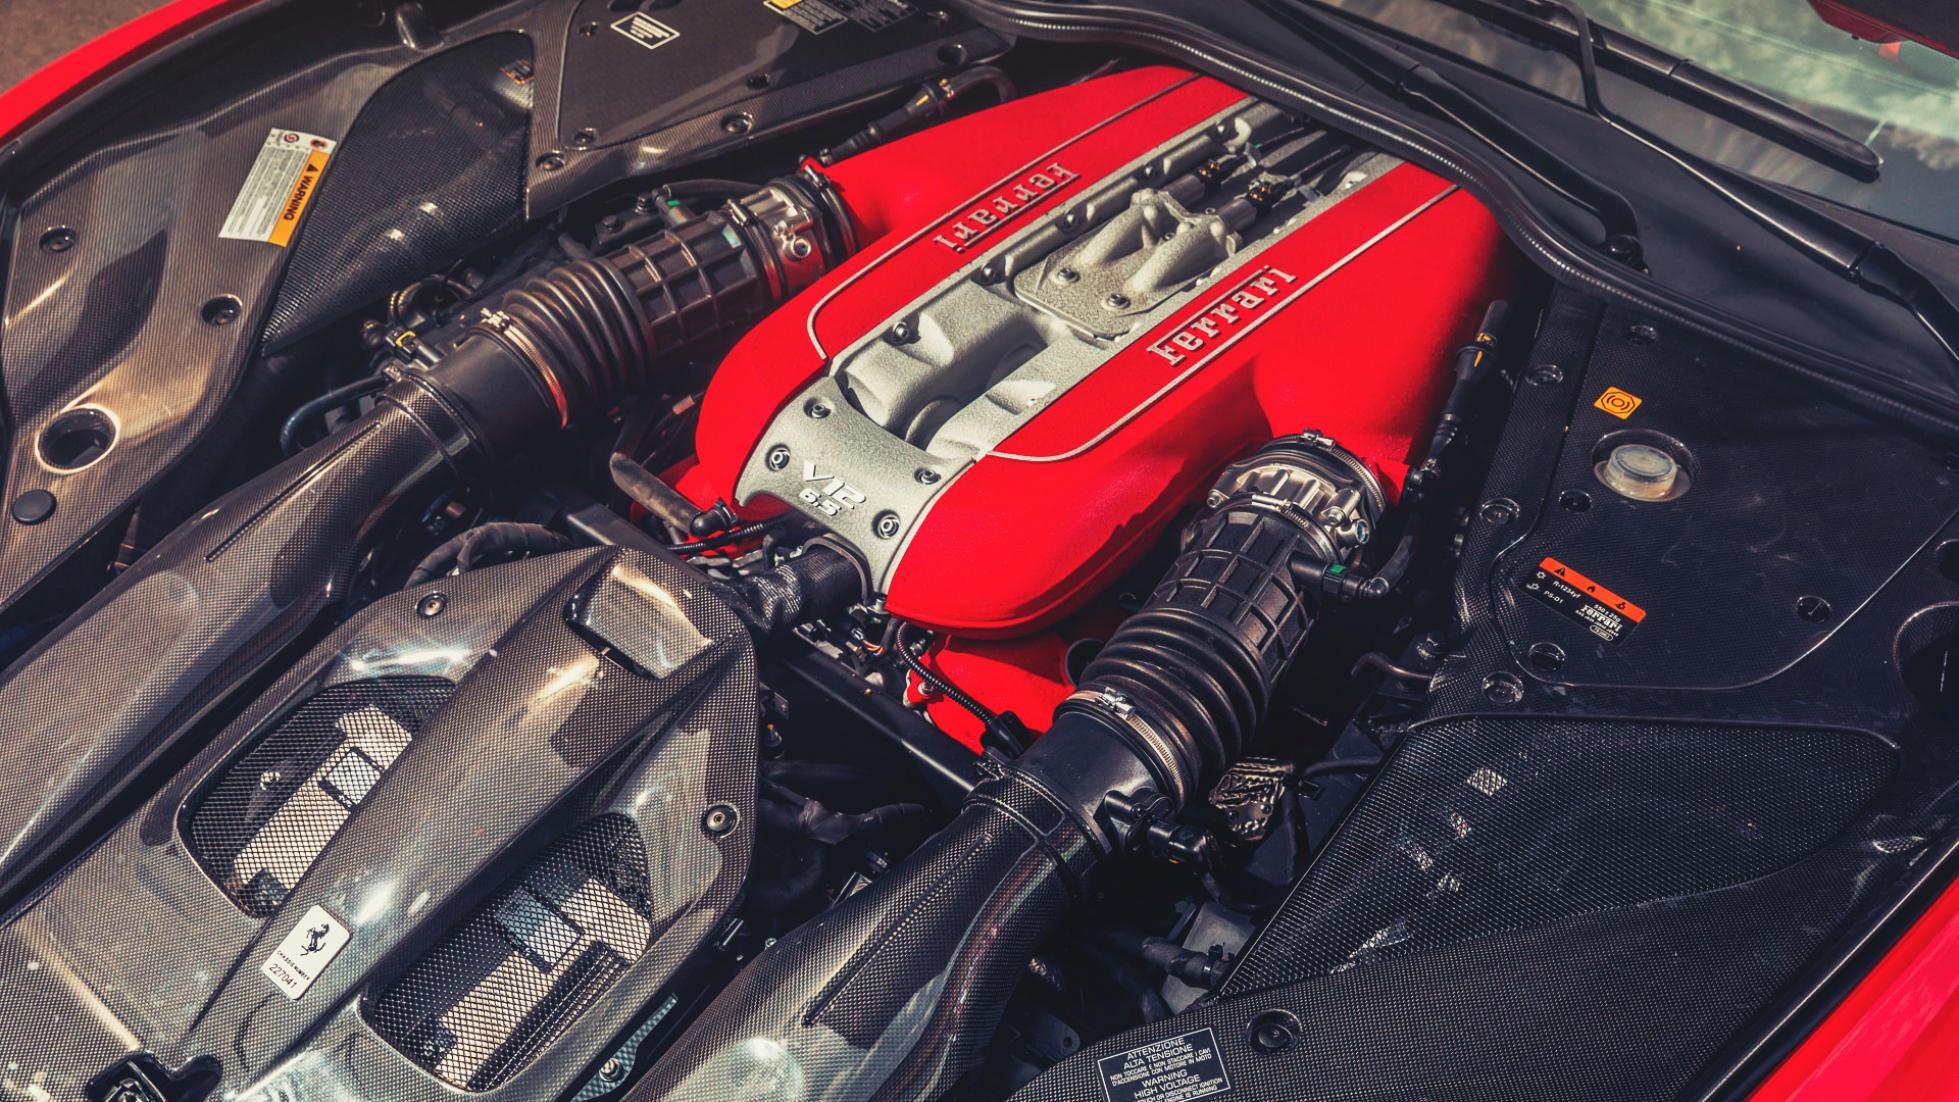 Complimentary Ferrari V-12 Engine Included with Purchase of This Engine Dyno